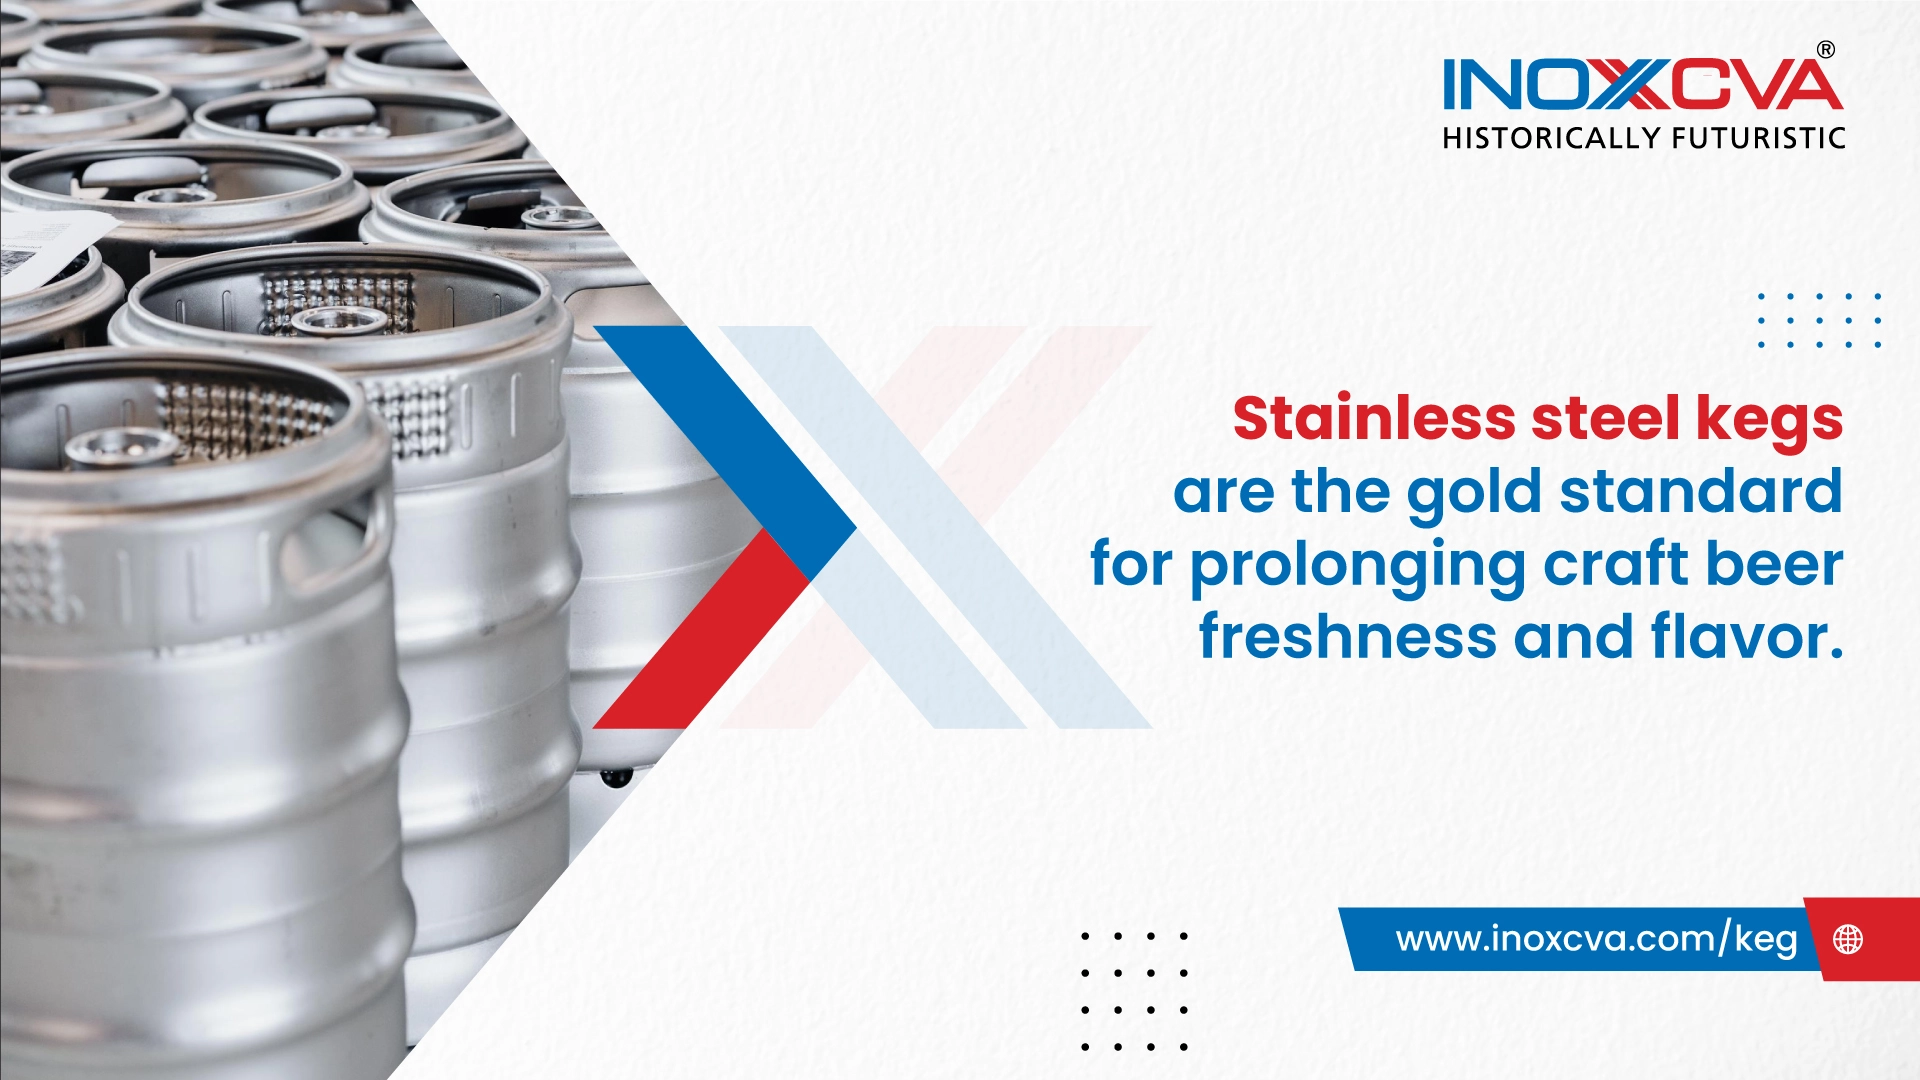  Stainless steel kegs are the gold standard for prolonging craft beer freshness and flavor.
 
